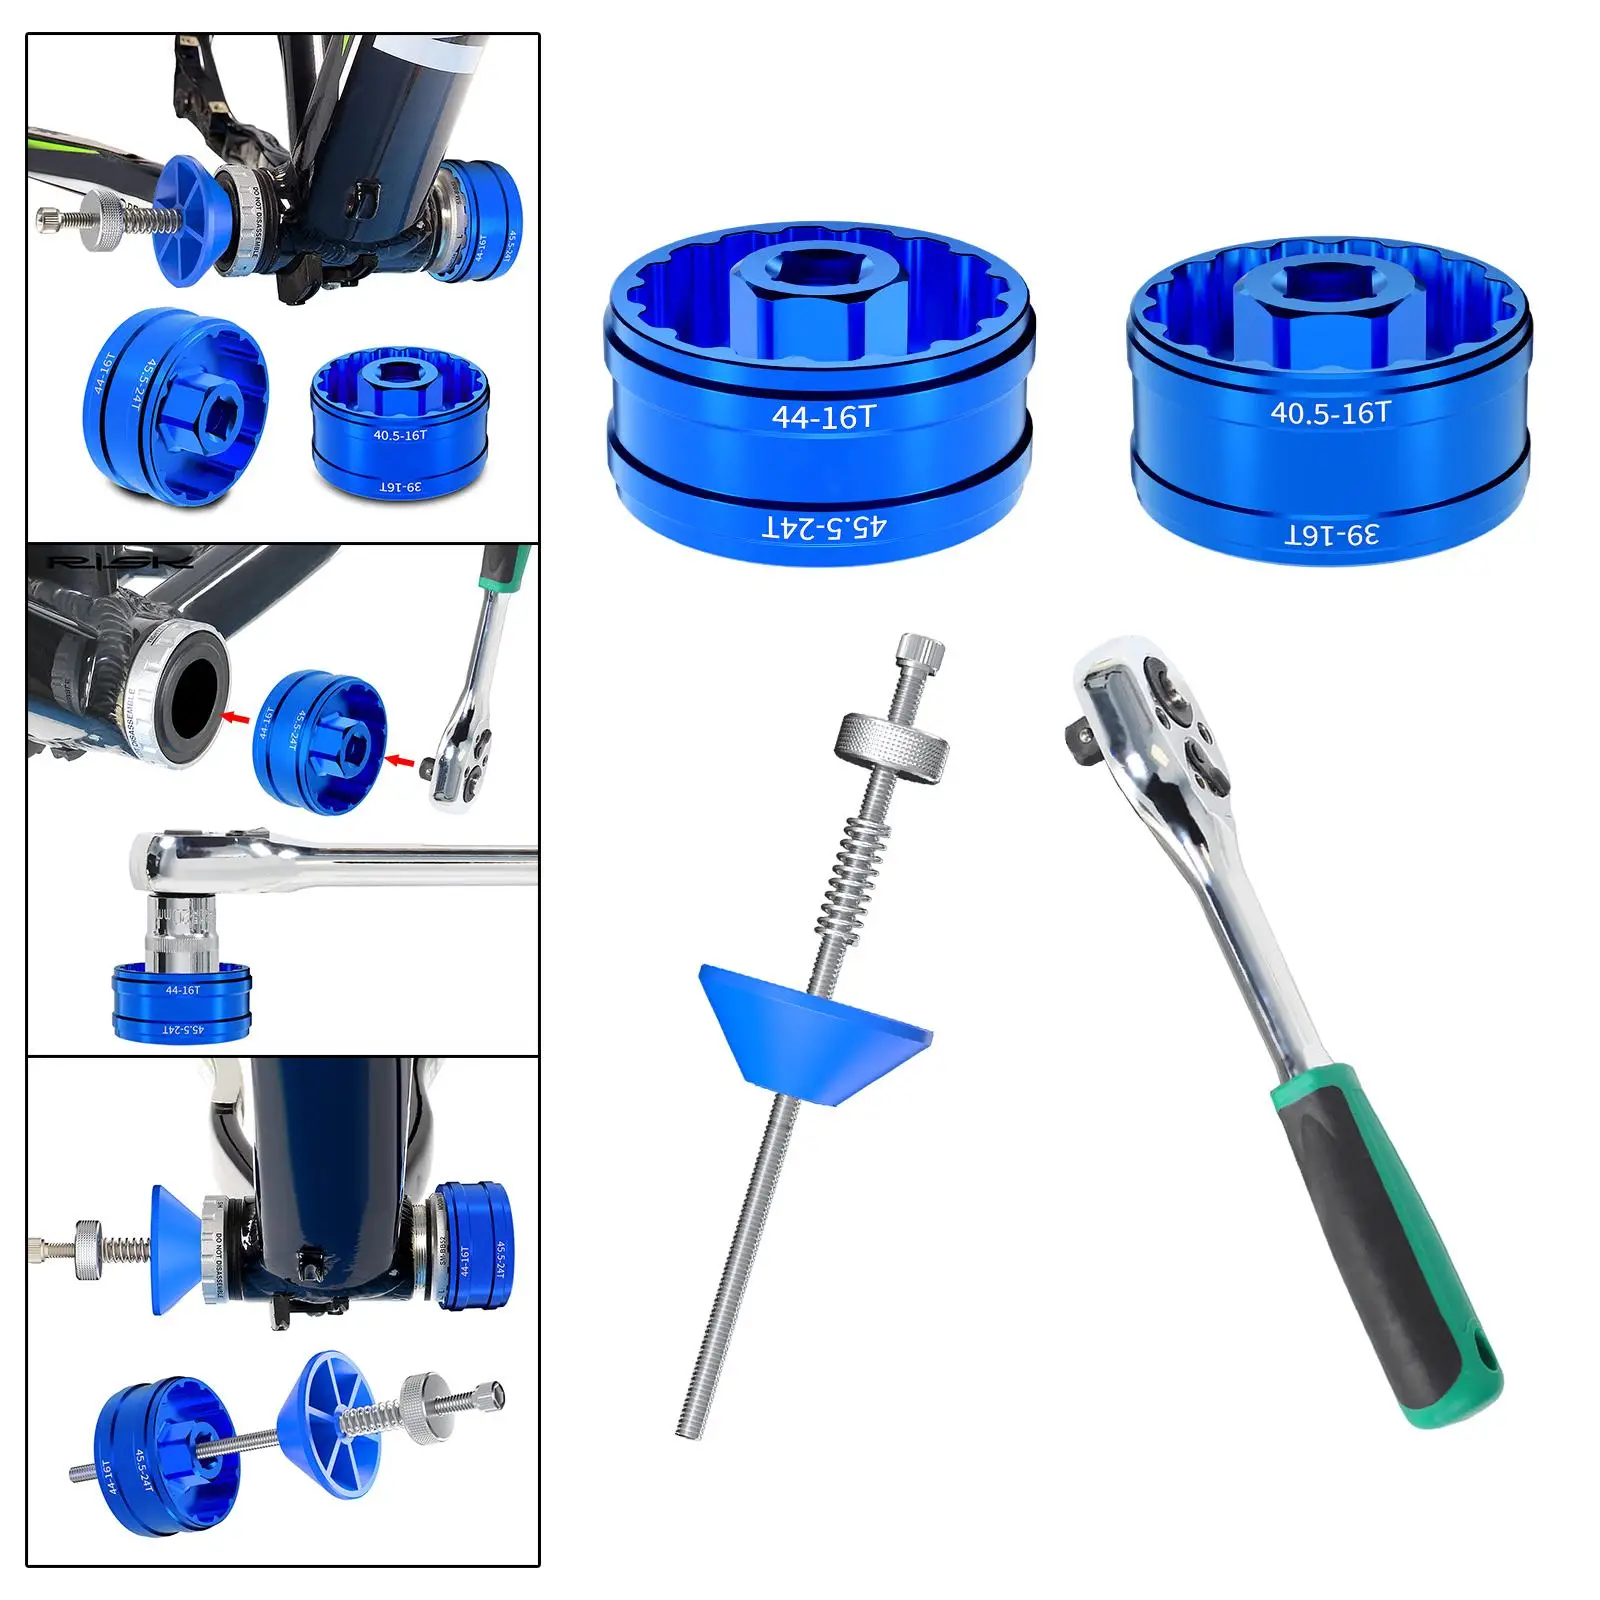 BB Removal Tool Bike Professional Durable Portable Maintenance Tool Accs Outdoor Disassembly Bottom Bracket Bearing Repair Tool